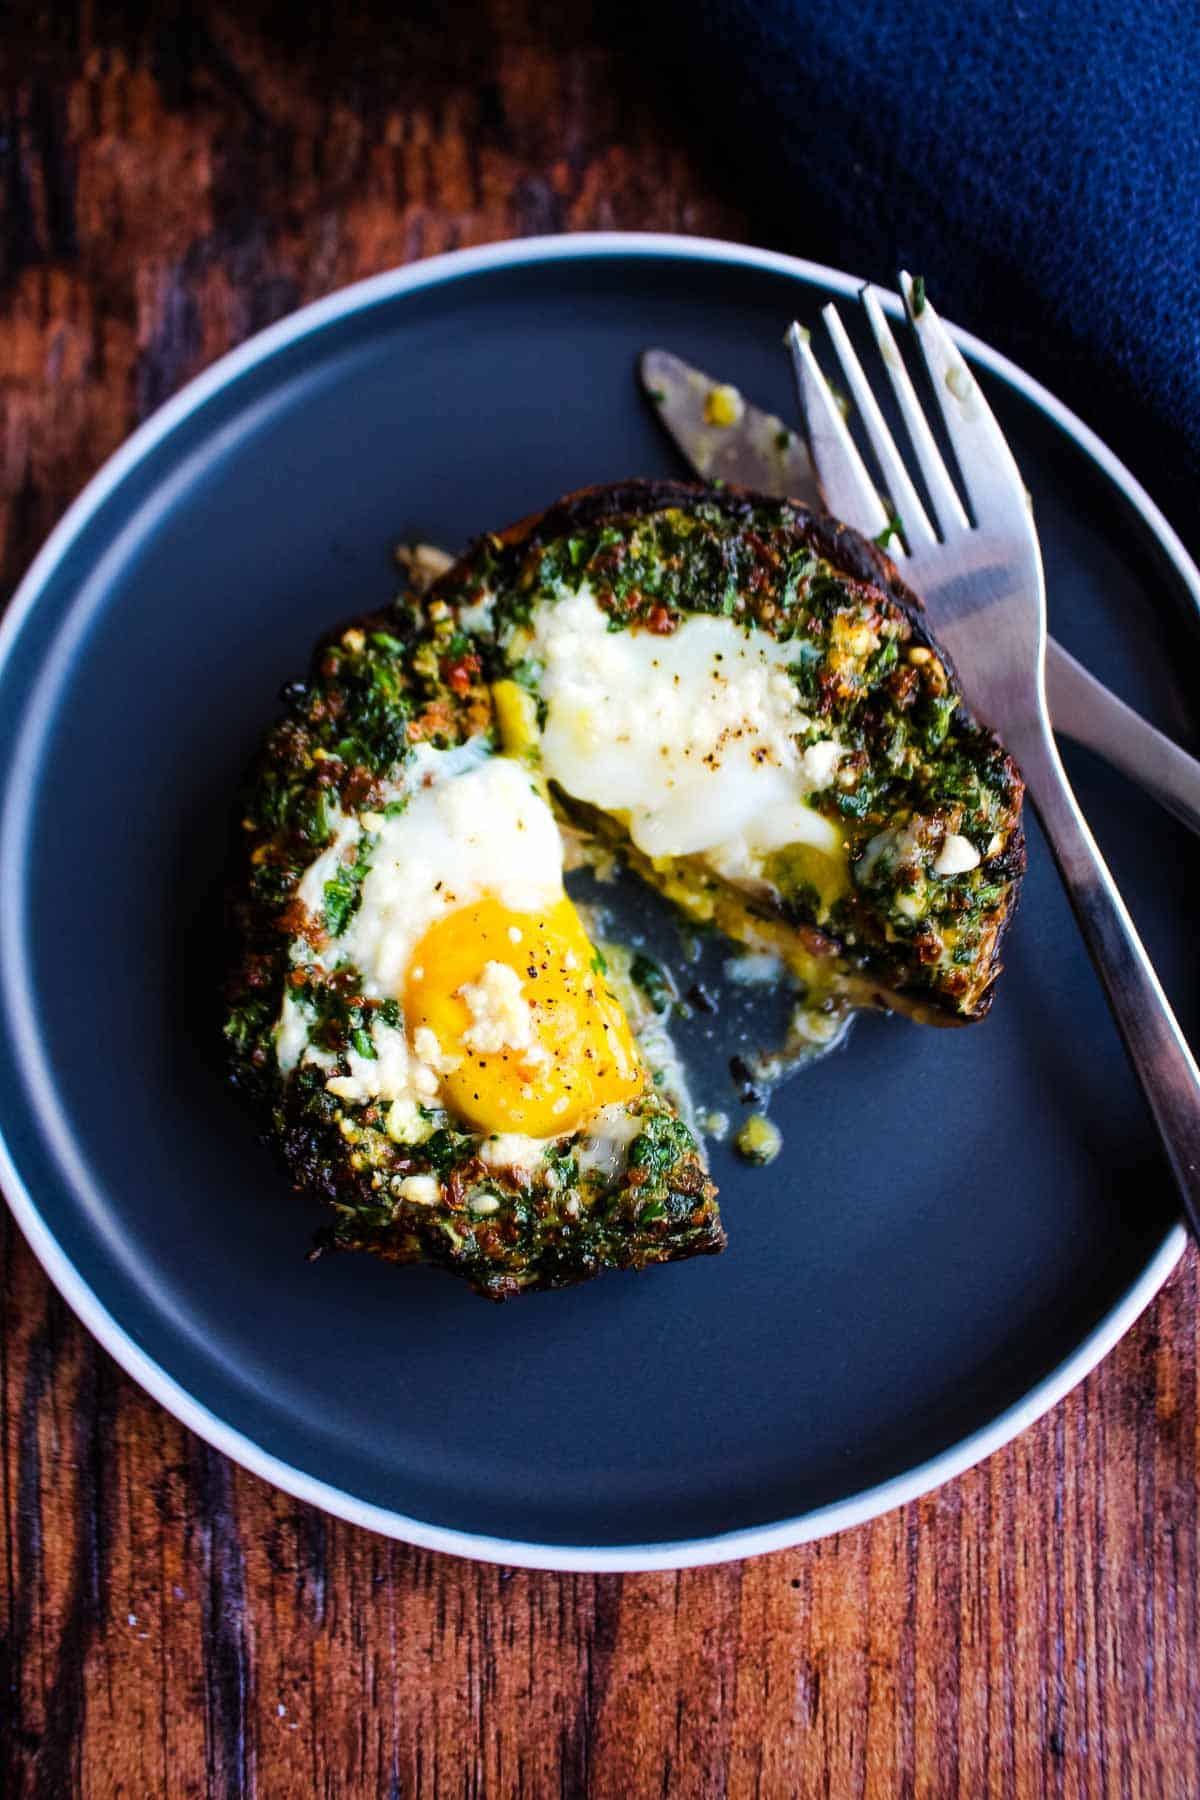 A breakfast mushrooms stuffed with eggs and veggies on a plate with fork and knife.